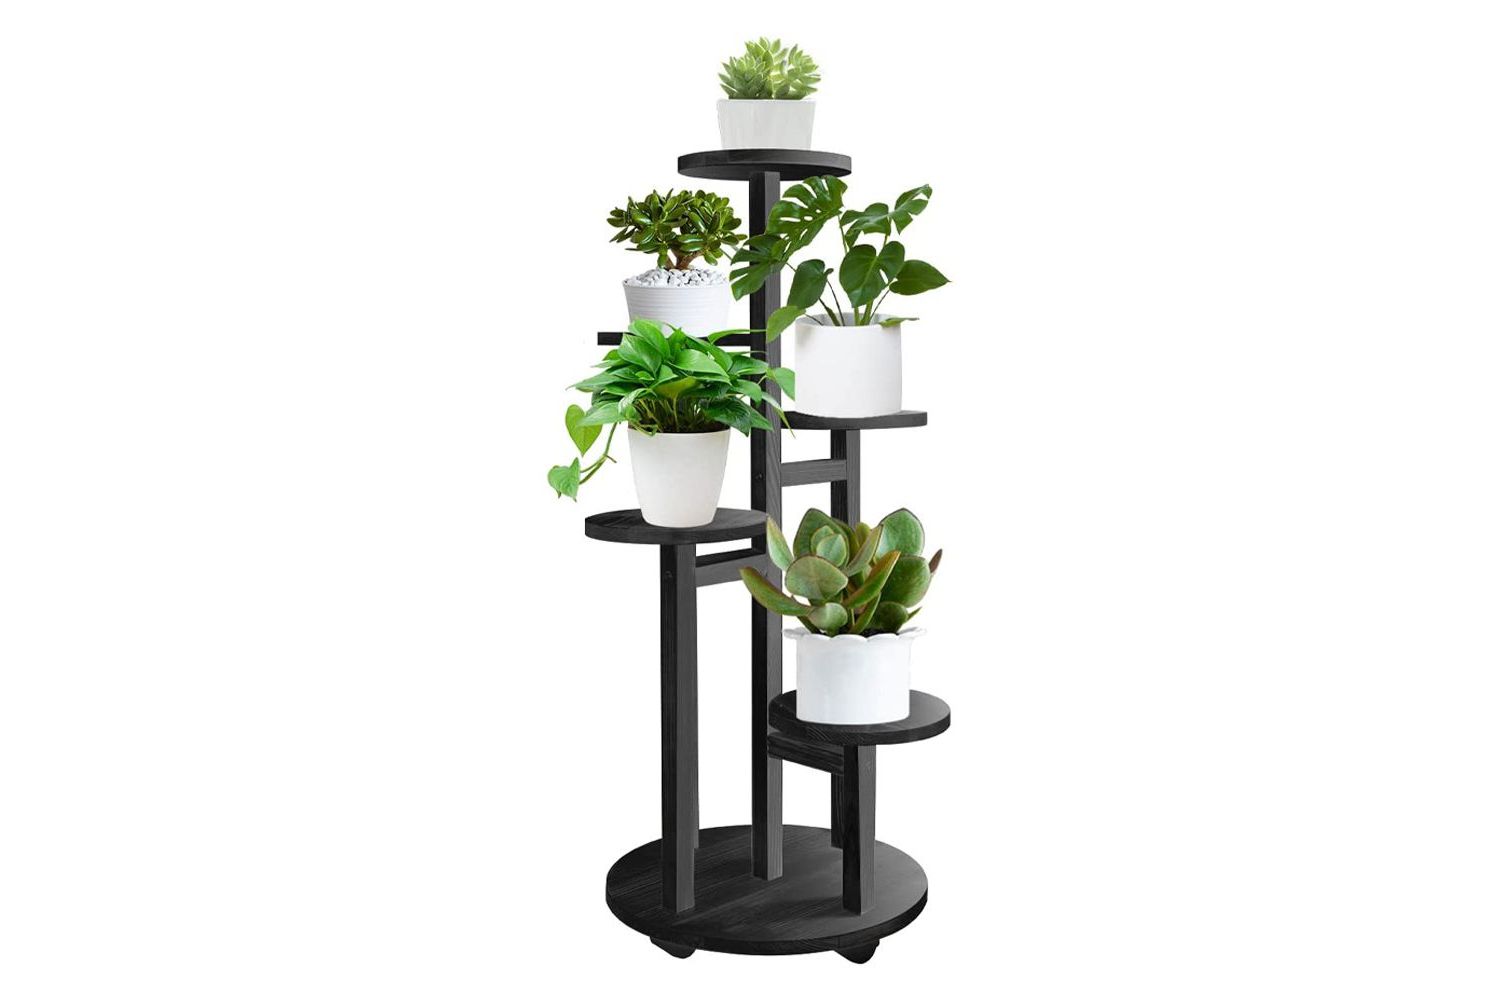 34 Inch Plant Stands Within Newest The 13 Best Plant Stands Of  (View 6 of 15)